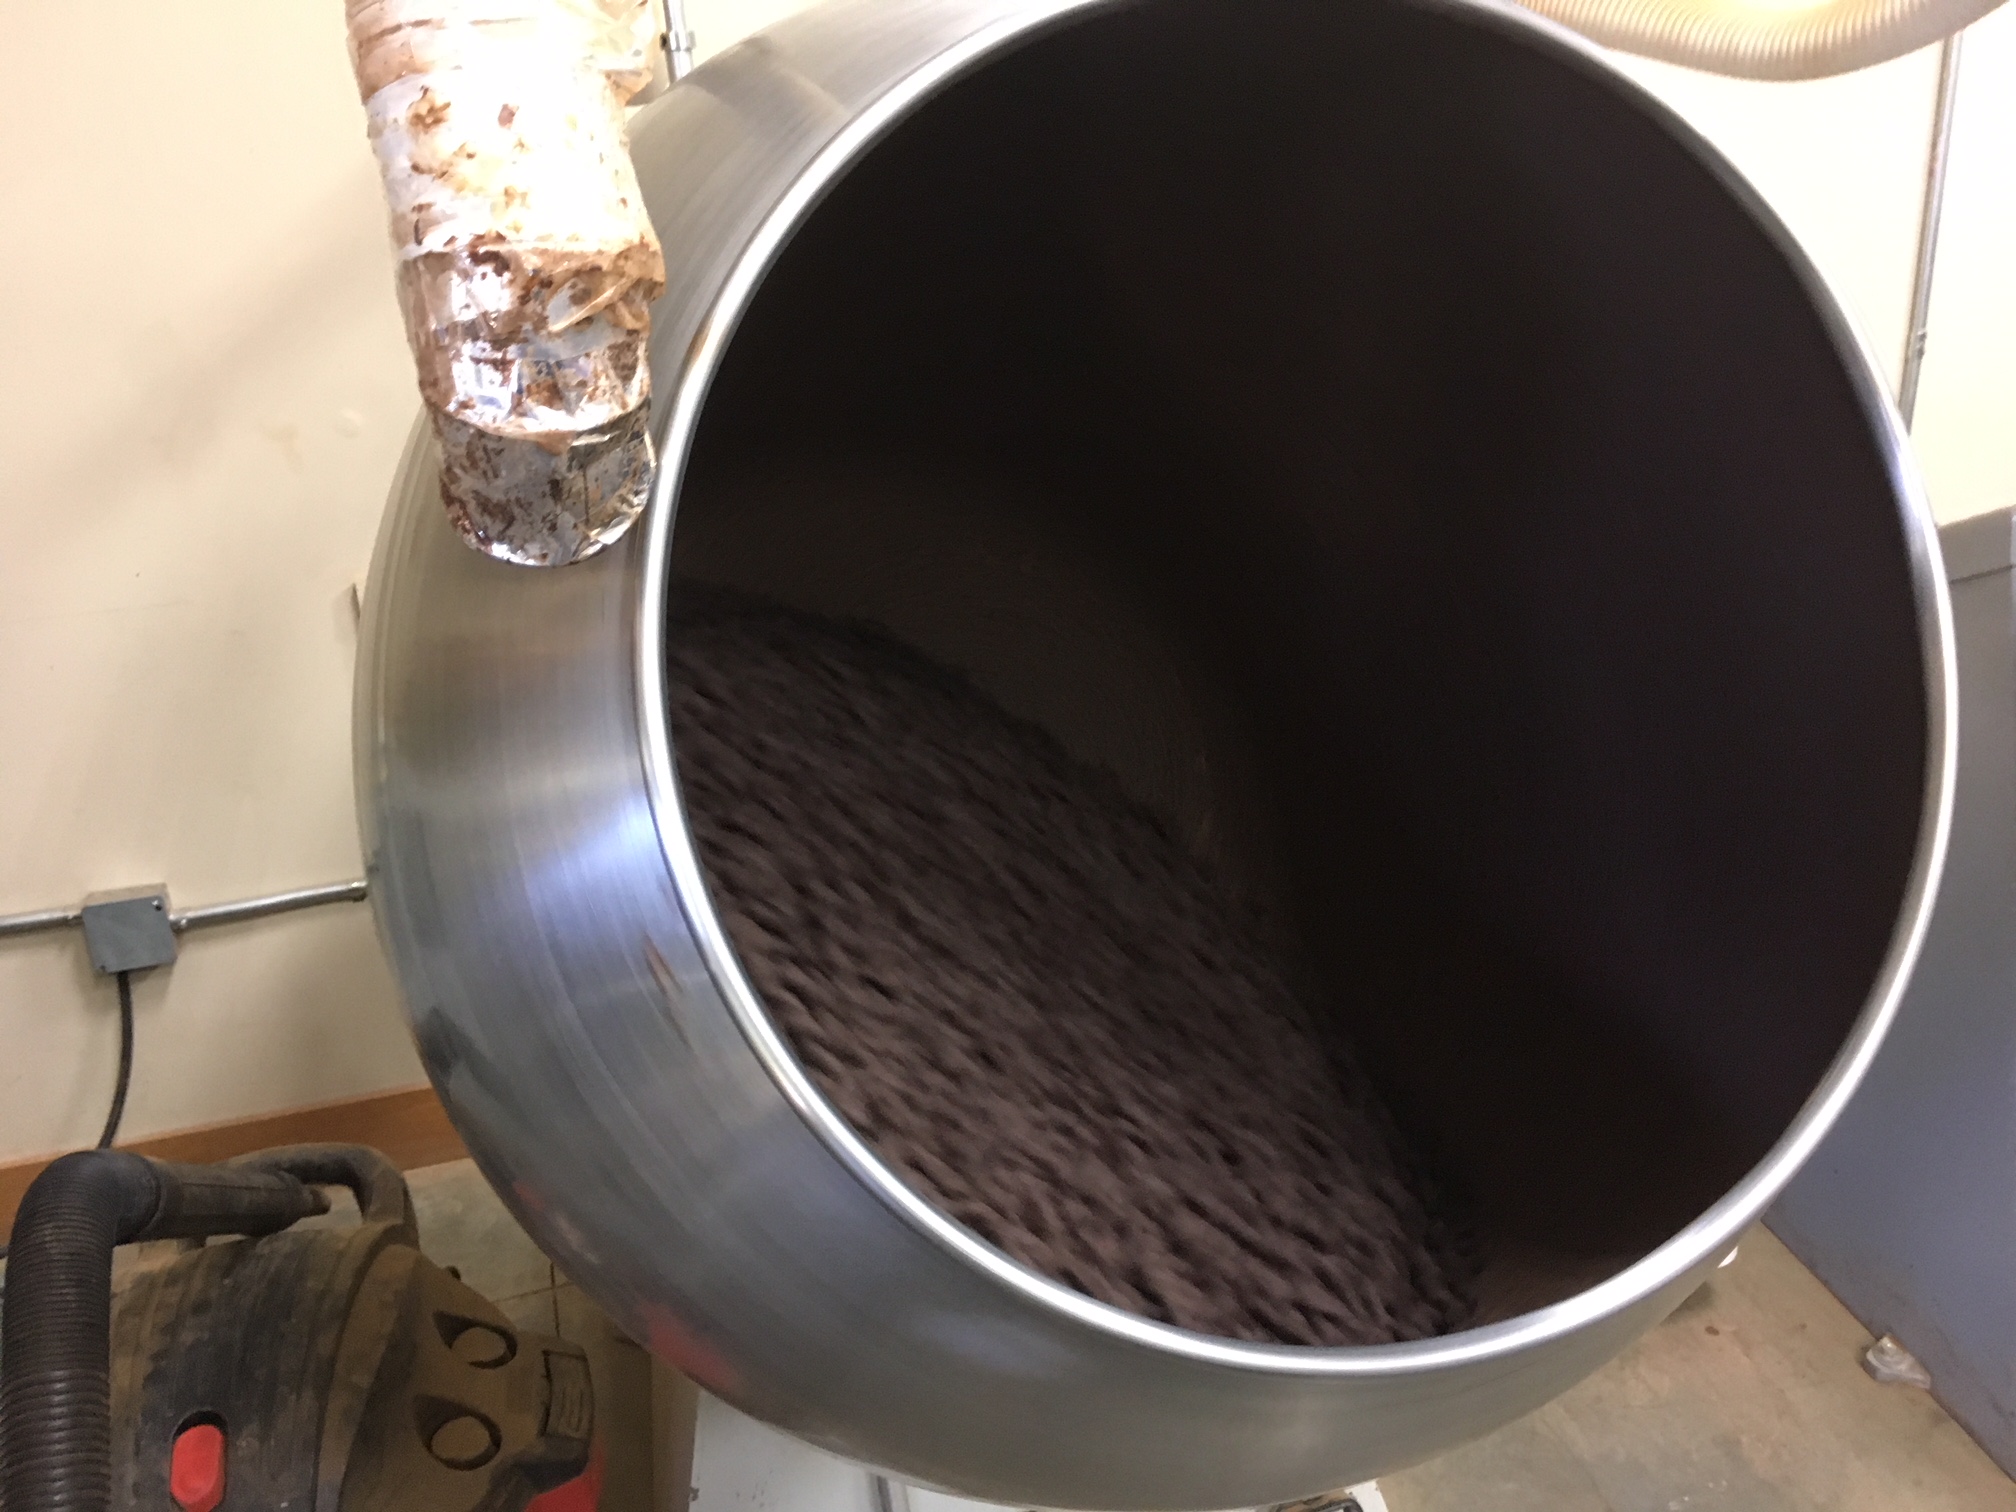 A chocolate panning machine burnishing chocolate covered almonds to a perfect shape